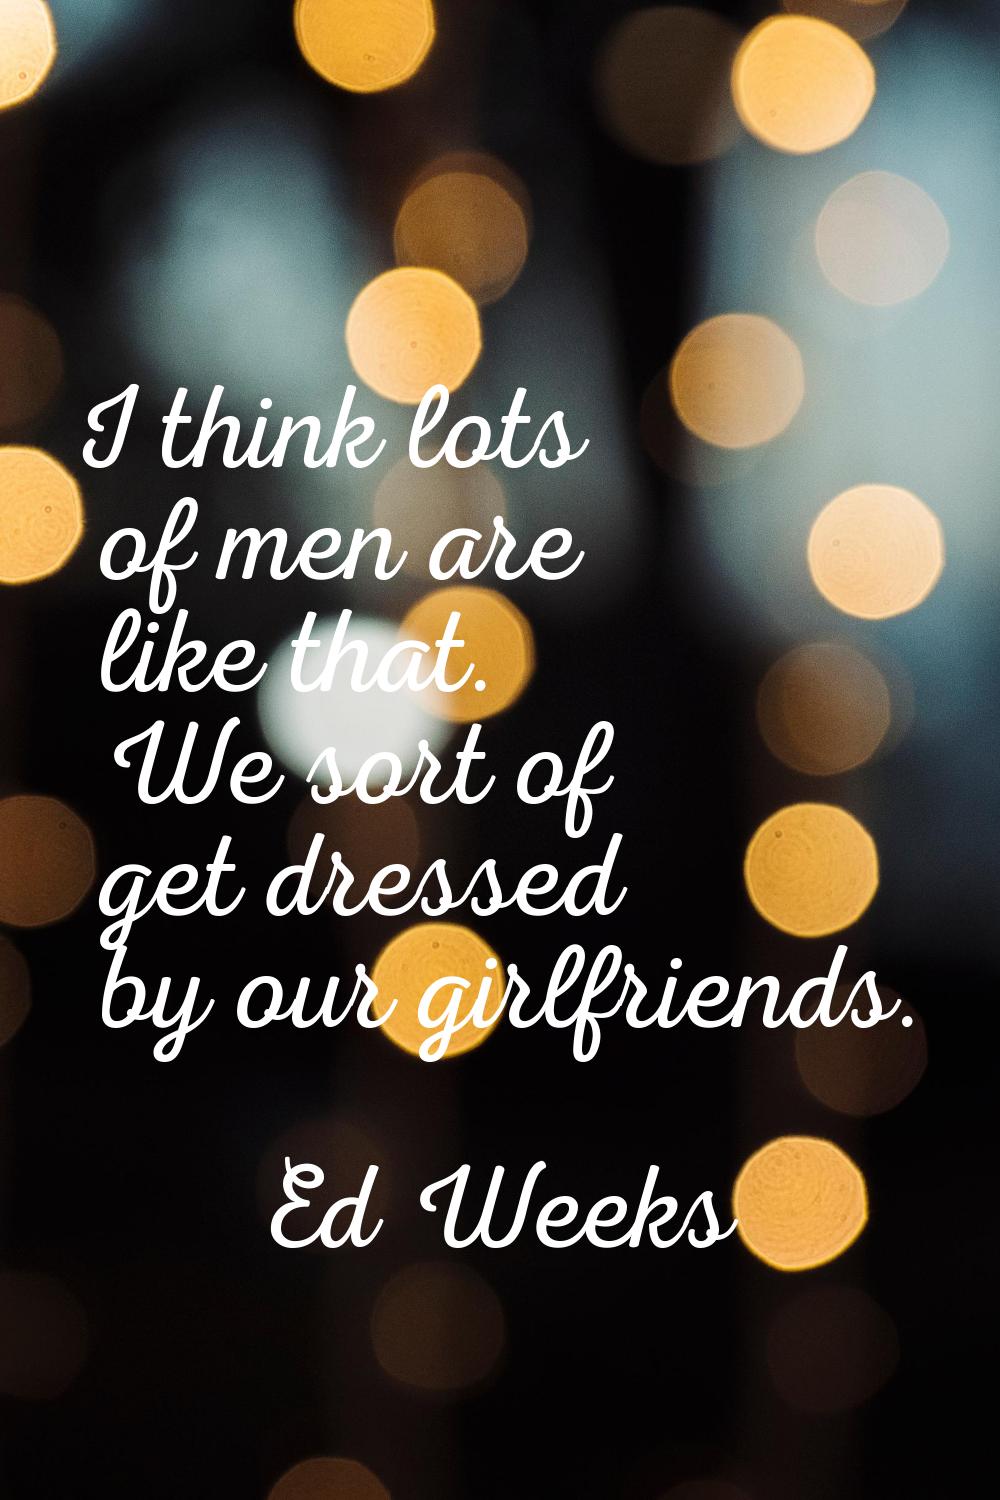 I think lots of men are like that. We sort of get dressed by our girlfriends.